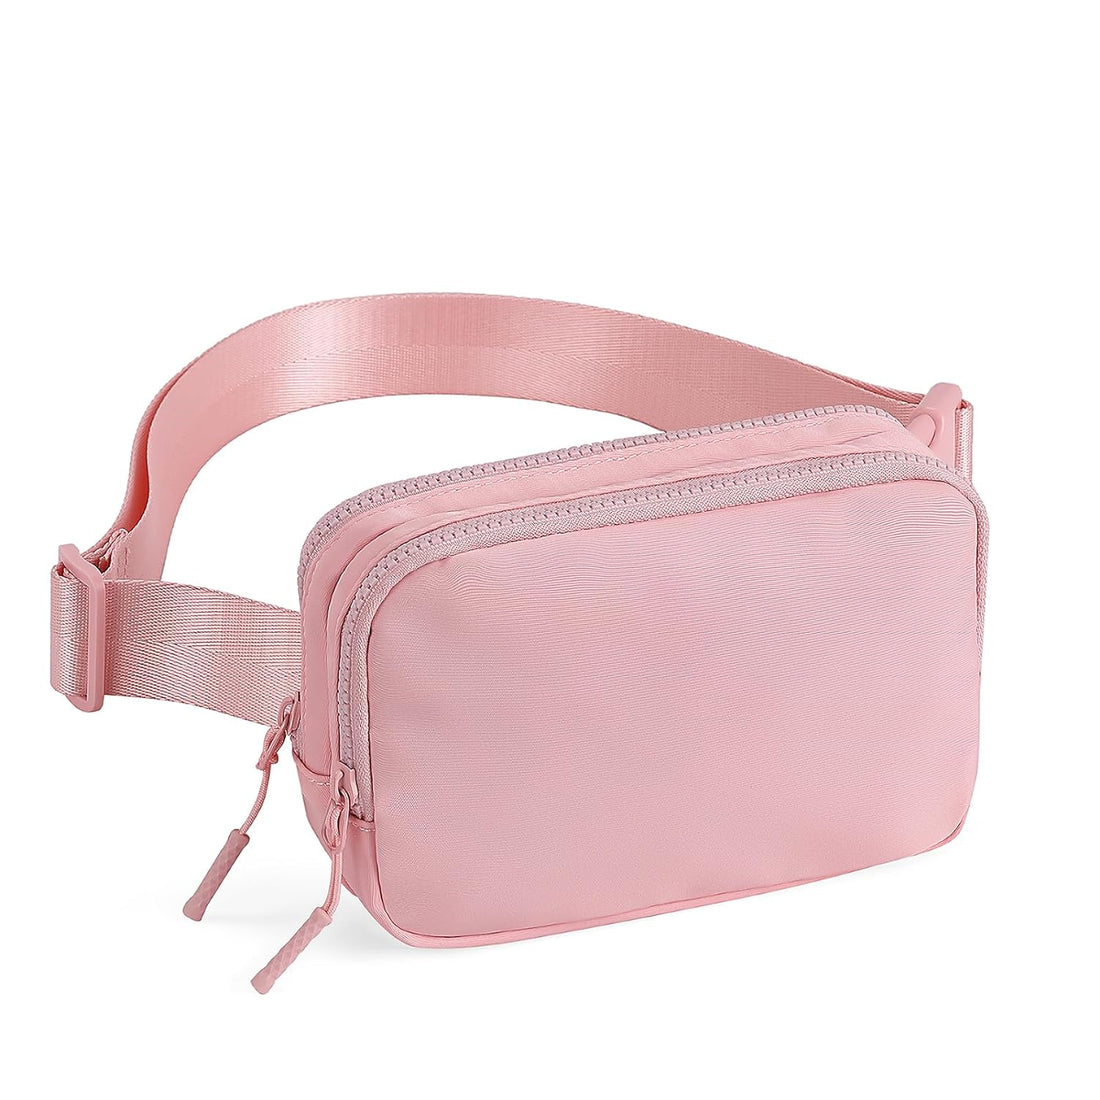 CLUCI Small Belt Bag for Women, Crossbody Everywhere Waist Packs Trendy, Women's Fanny Pack with Adjustable Strap, Pink, Small